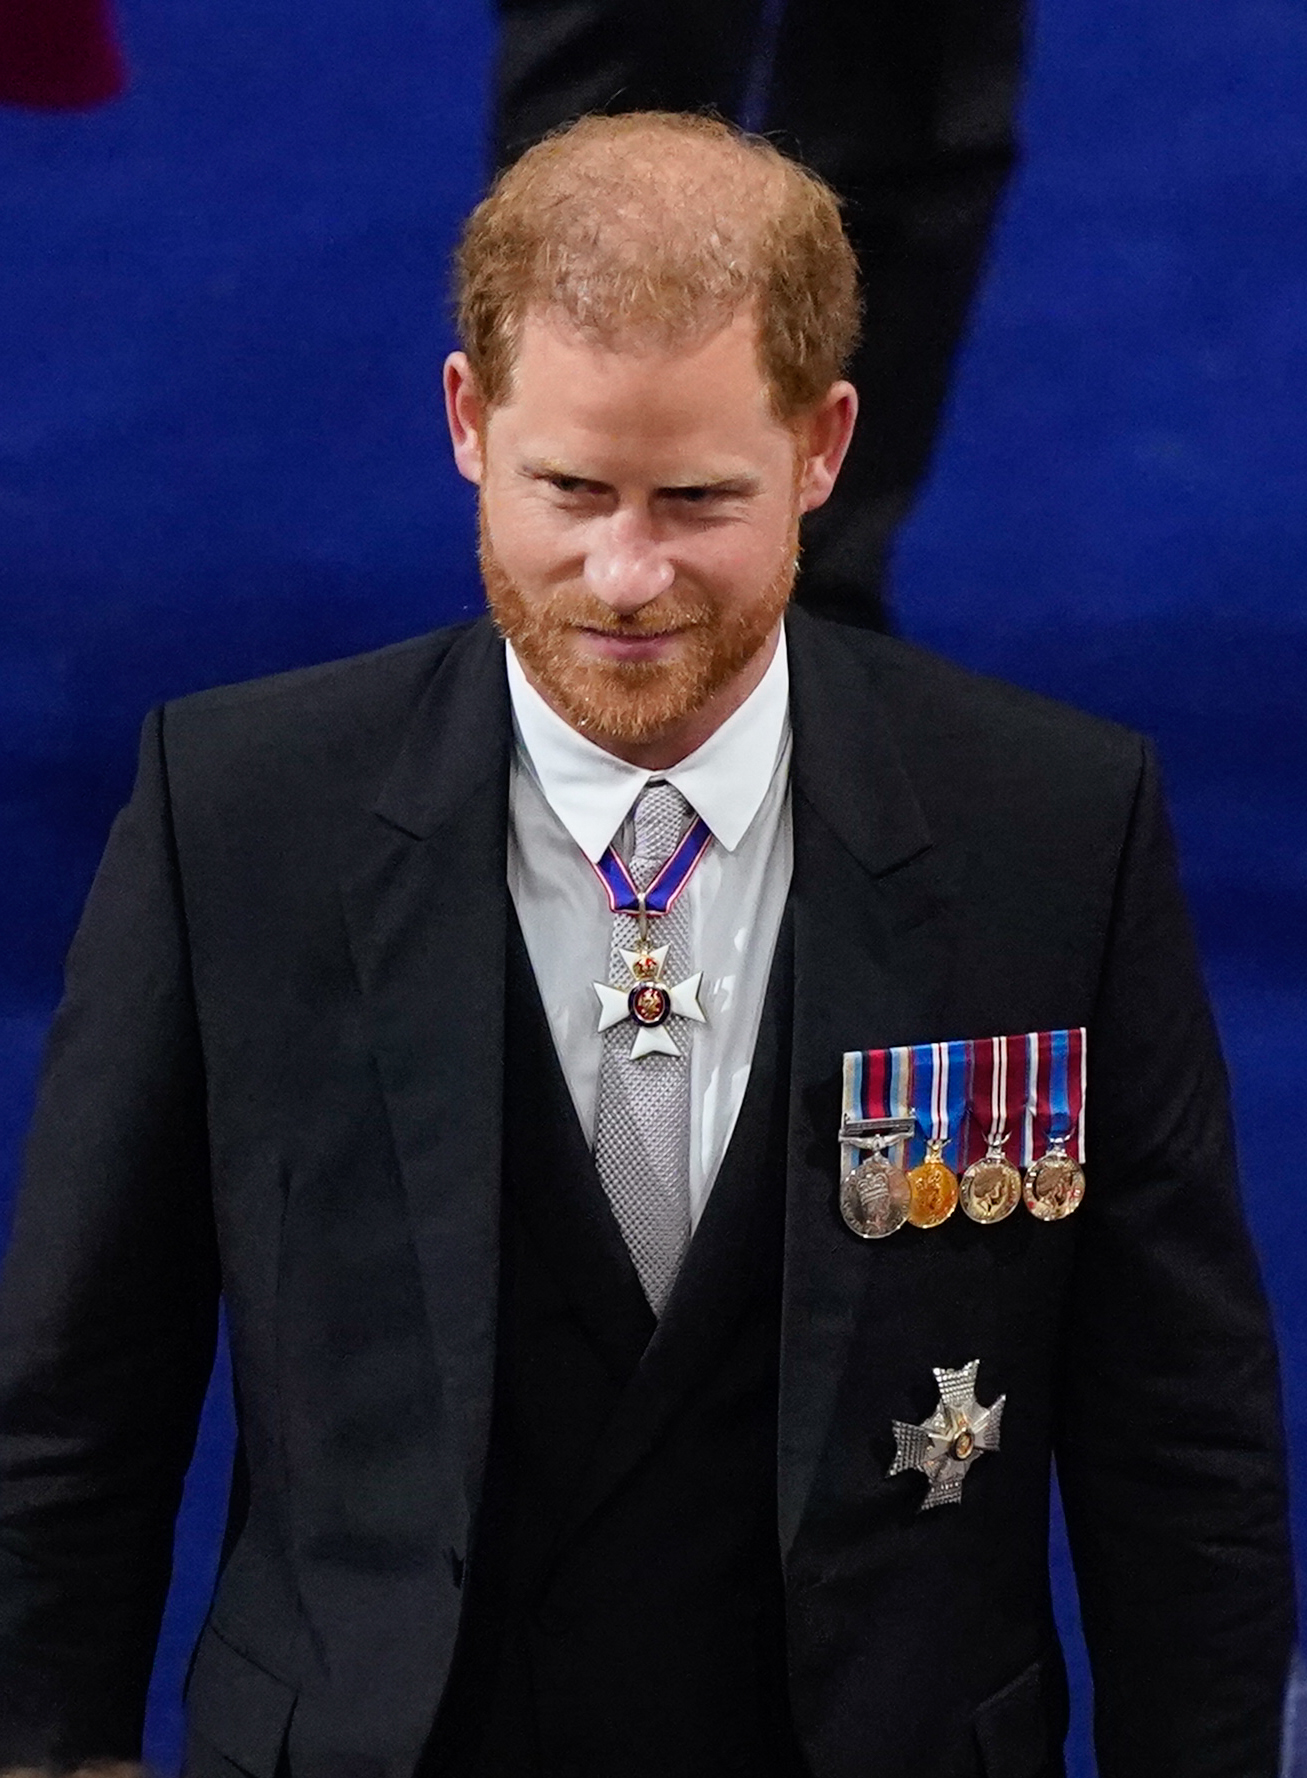 Prince Harry, Duke of Sussex, at the coronation ceremony of King Charles III and Queen Camilla in Westminster Abbey, on May 6, 2023 in London, England. | Source: Getty Images